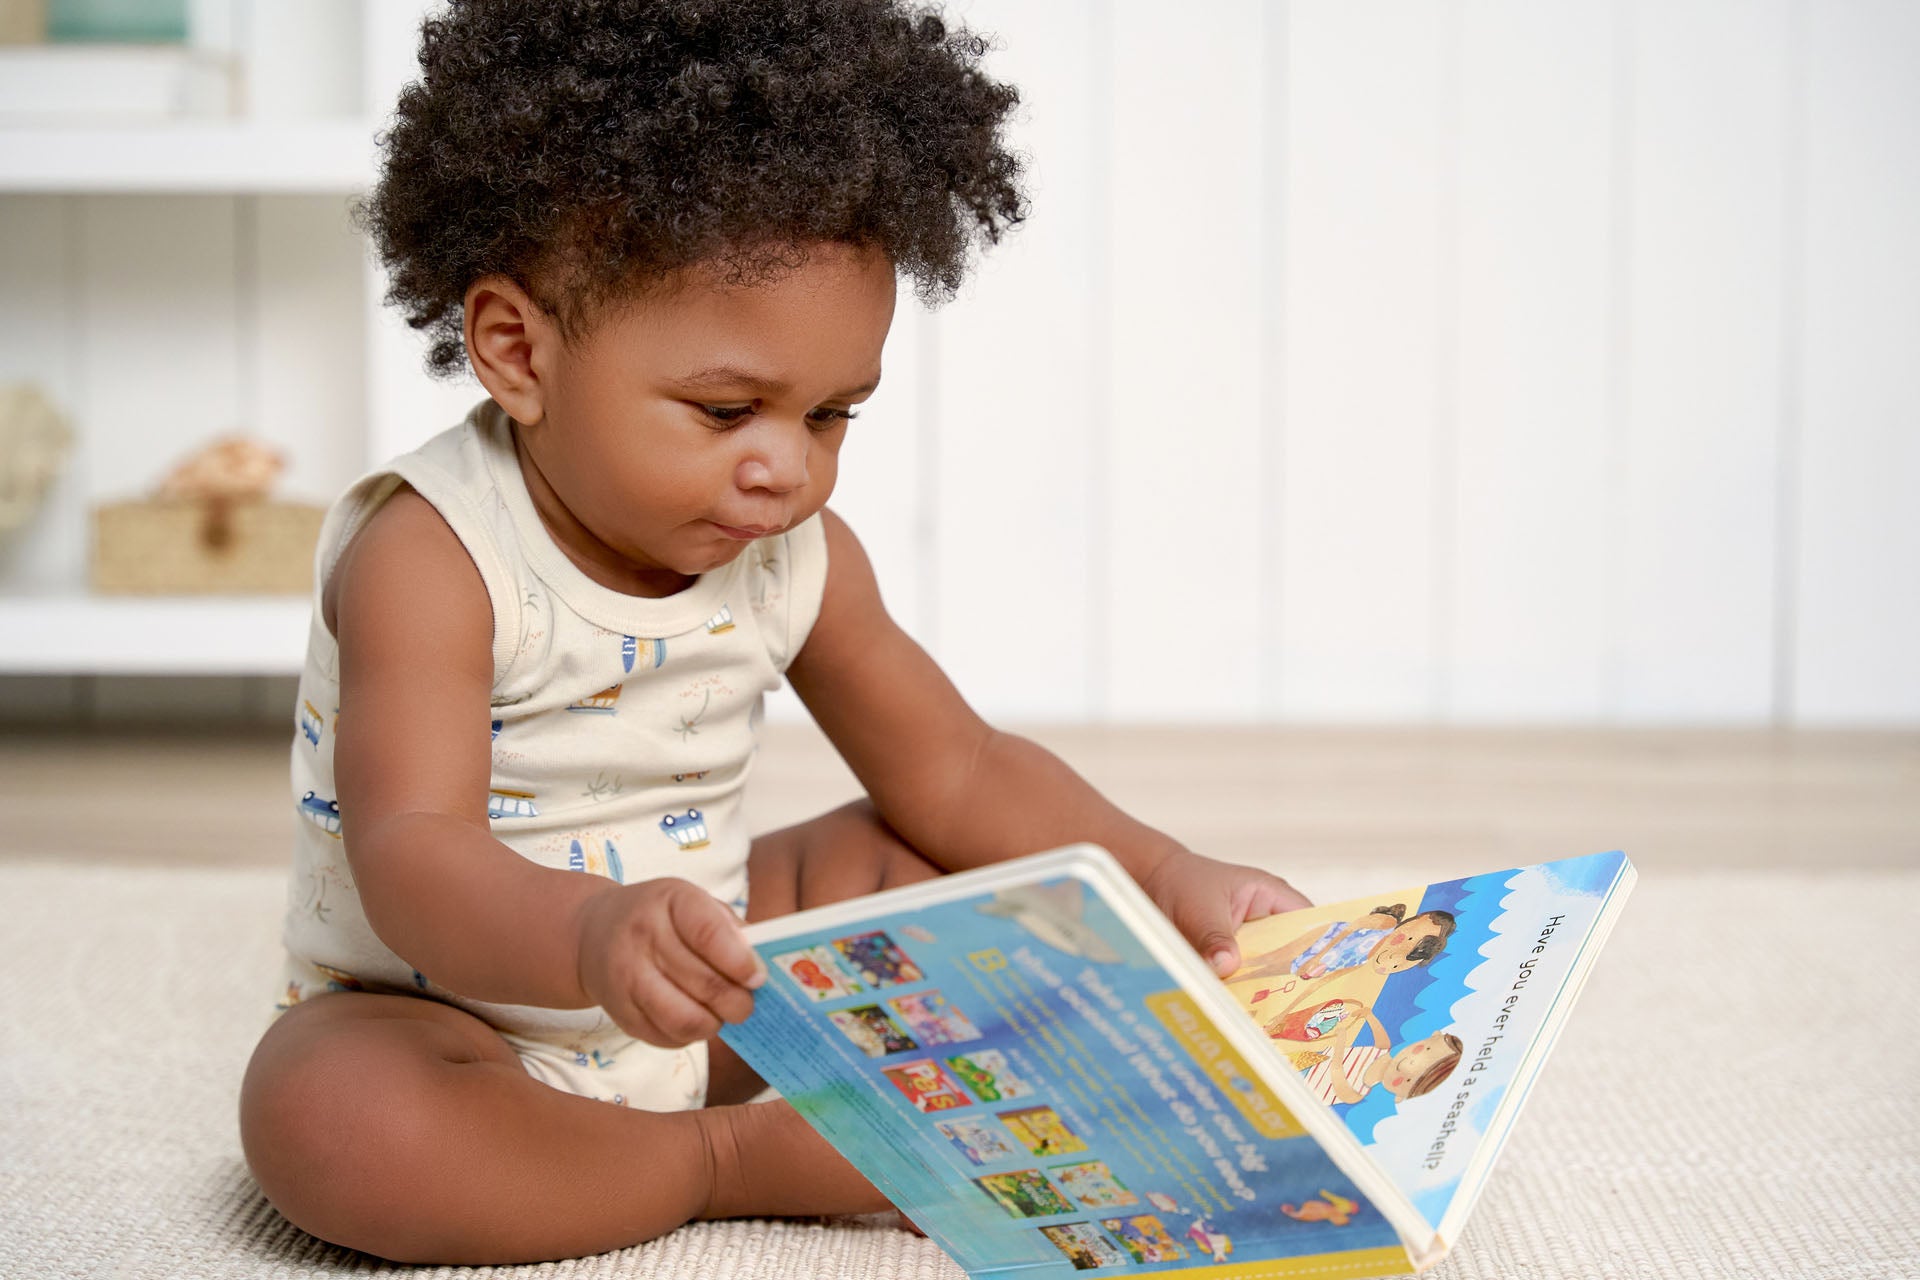 A toddler in a summer themed bodysuit sitting on a carpet, engrossed in reading a colorful picture book.